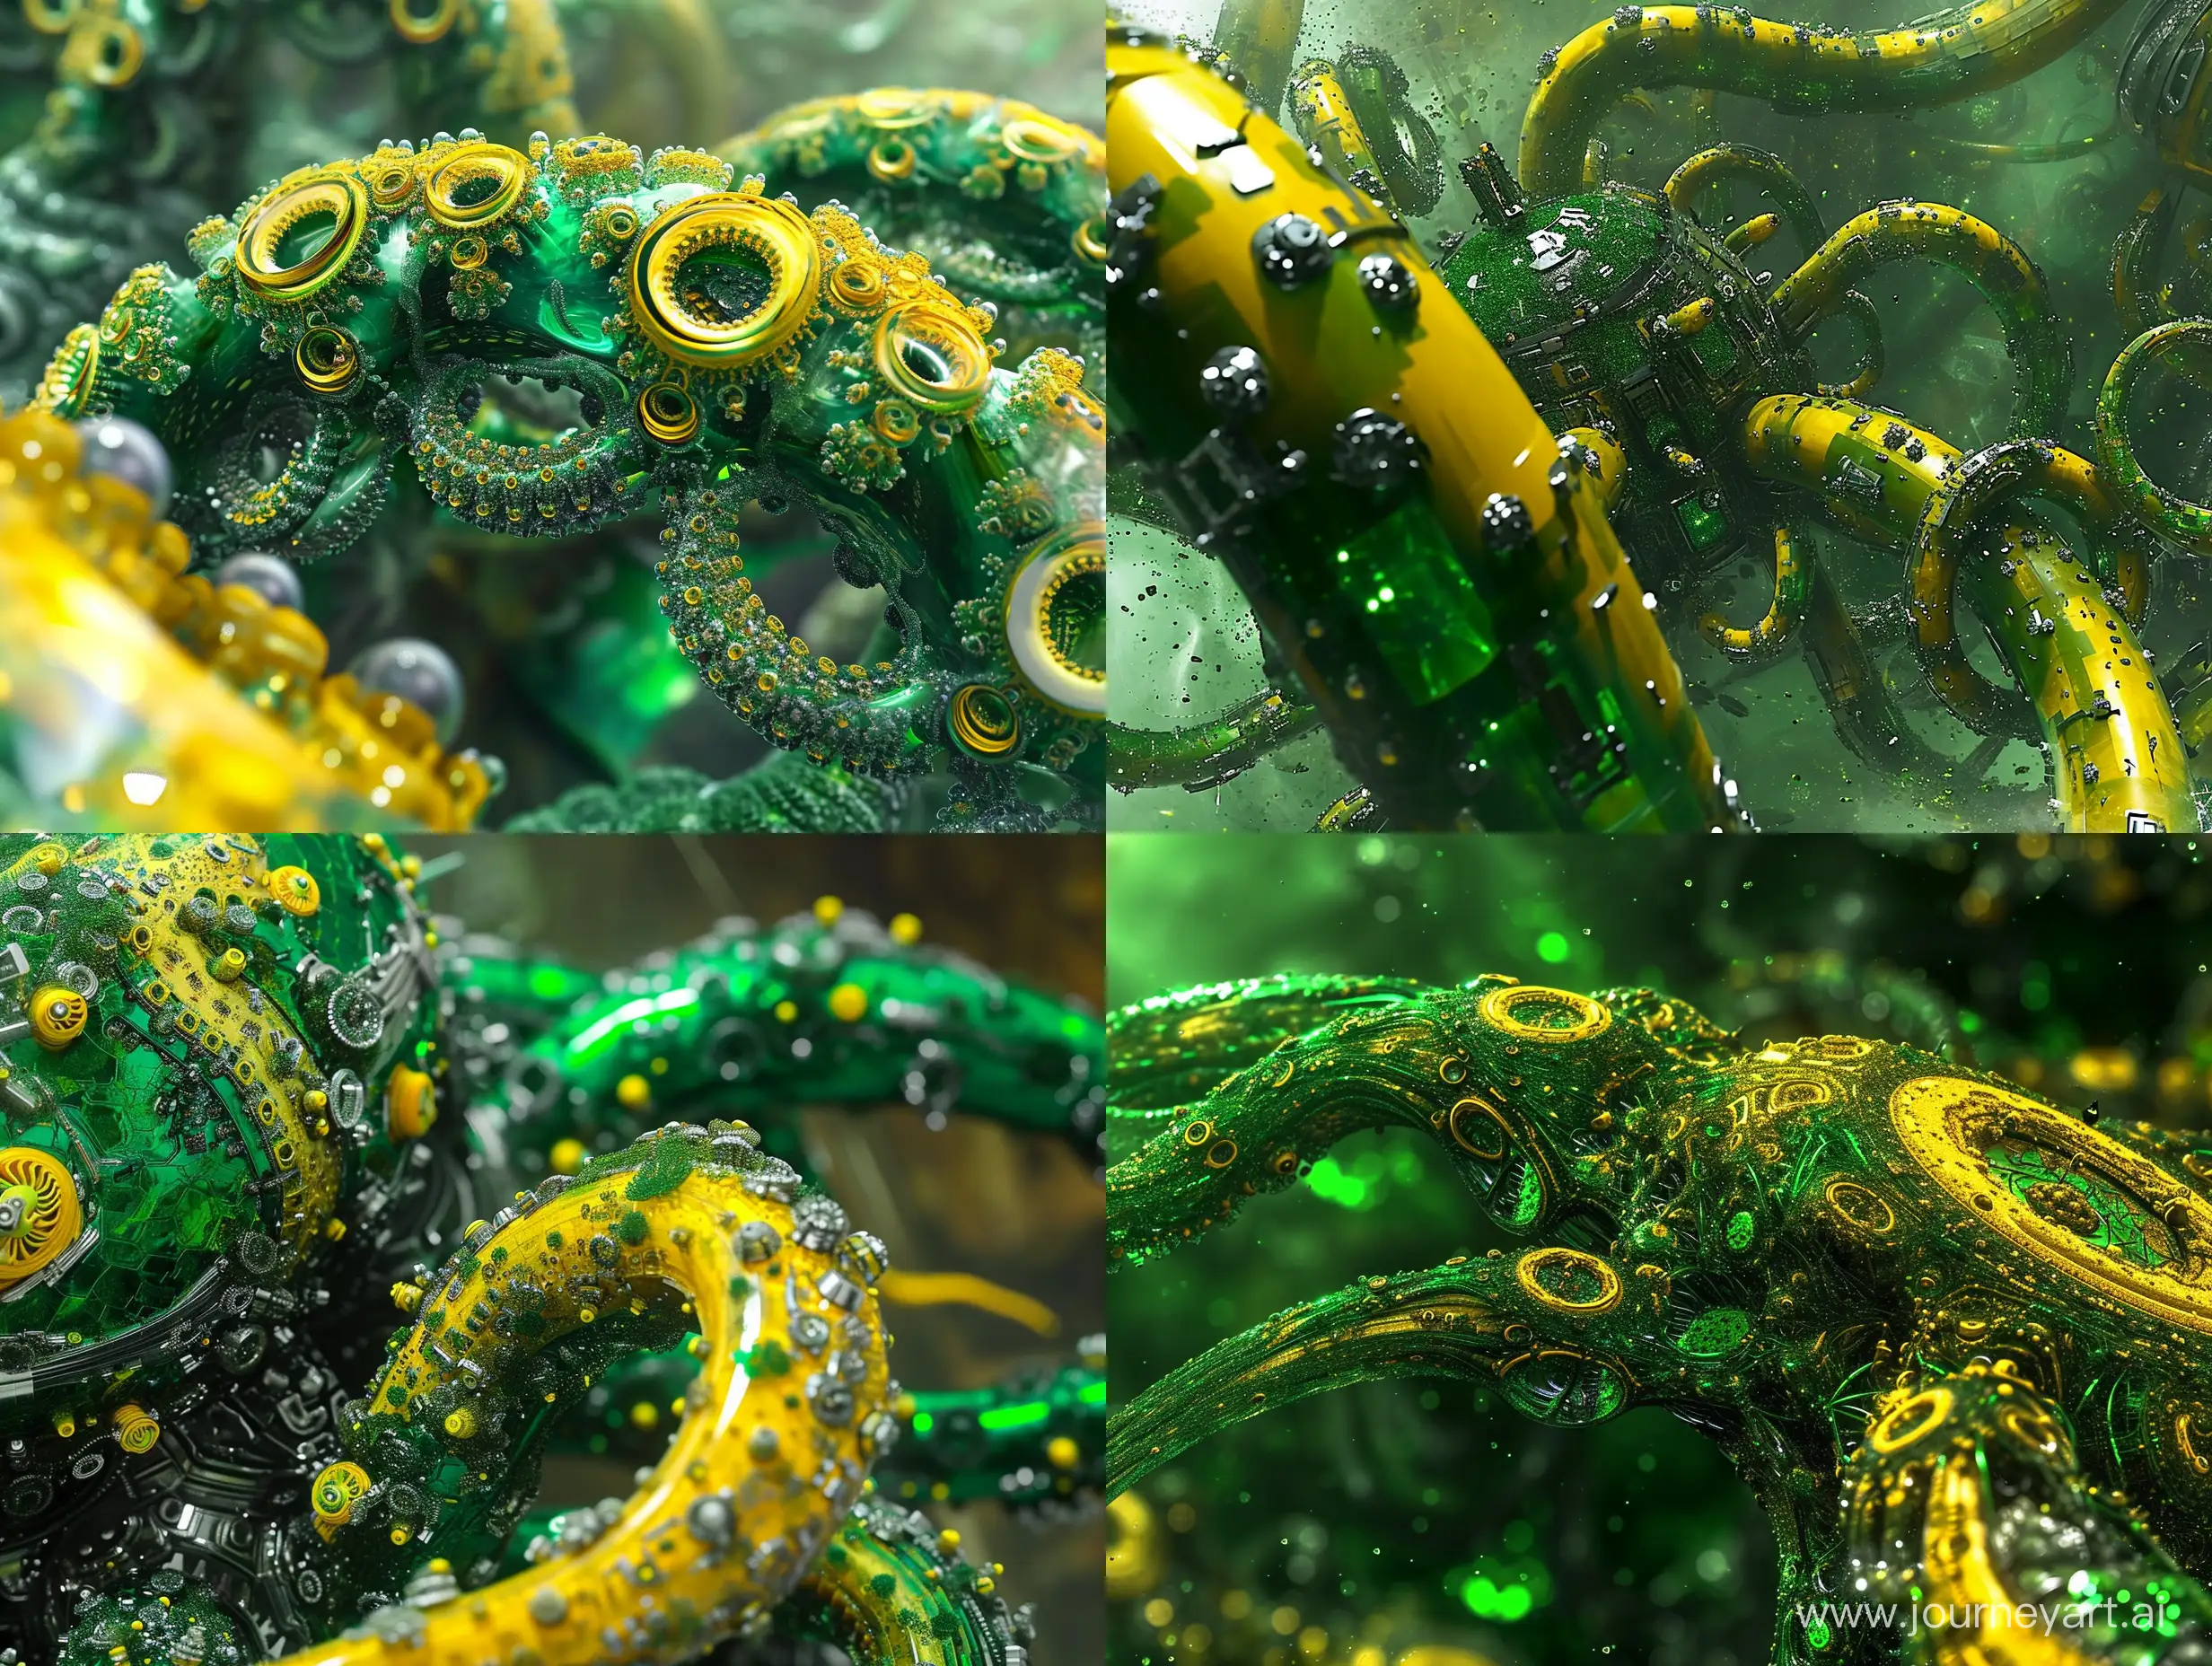 Nanobot swarm, nanomachine, Particle monster, spaceship, tentacle, green and yellow, metallic, extremely detailed